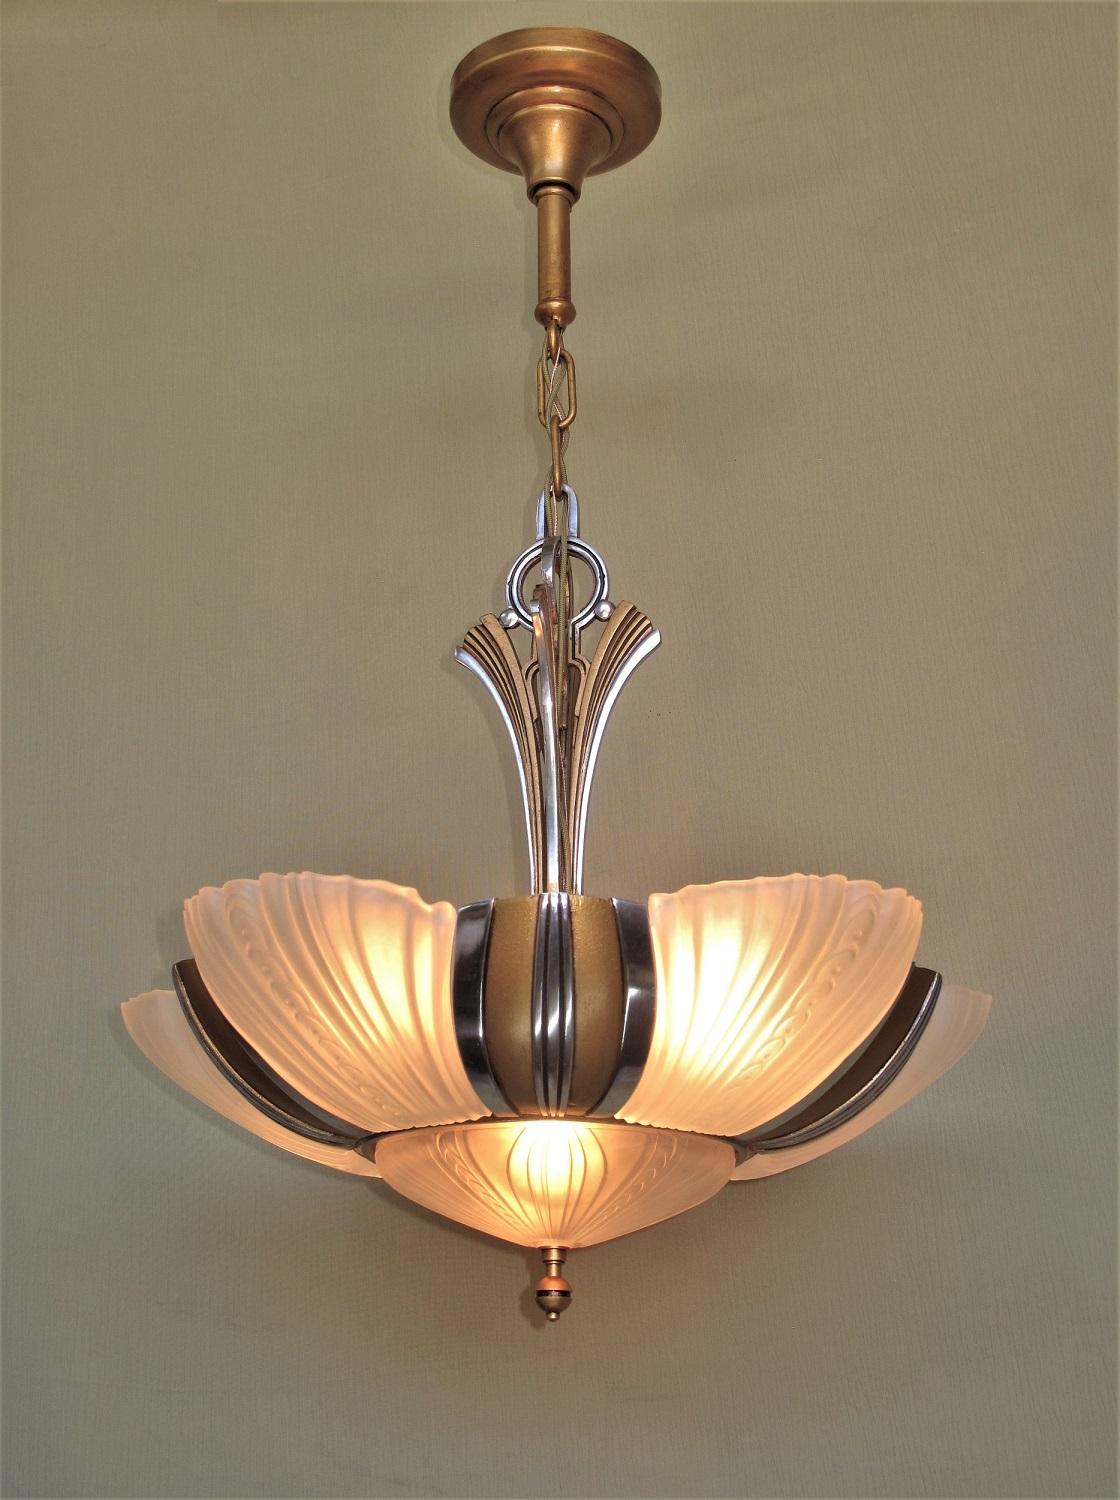 7 light bulb 1930s Art Deco ceiling fixture.  Possibly more than one available.
Restored to original colors including highly polished aluminum accents (NOT painted) and a warm antique golden body color. There two sockets lighting the bottom shade